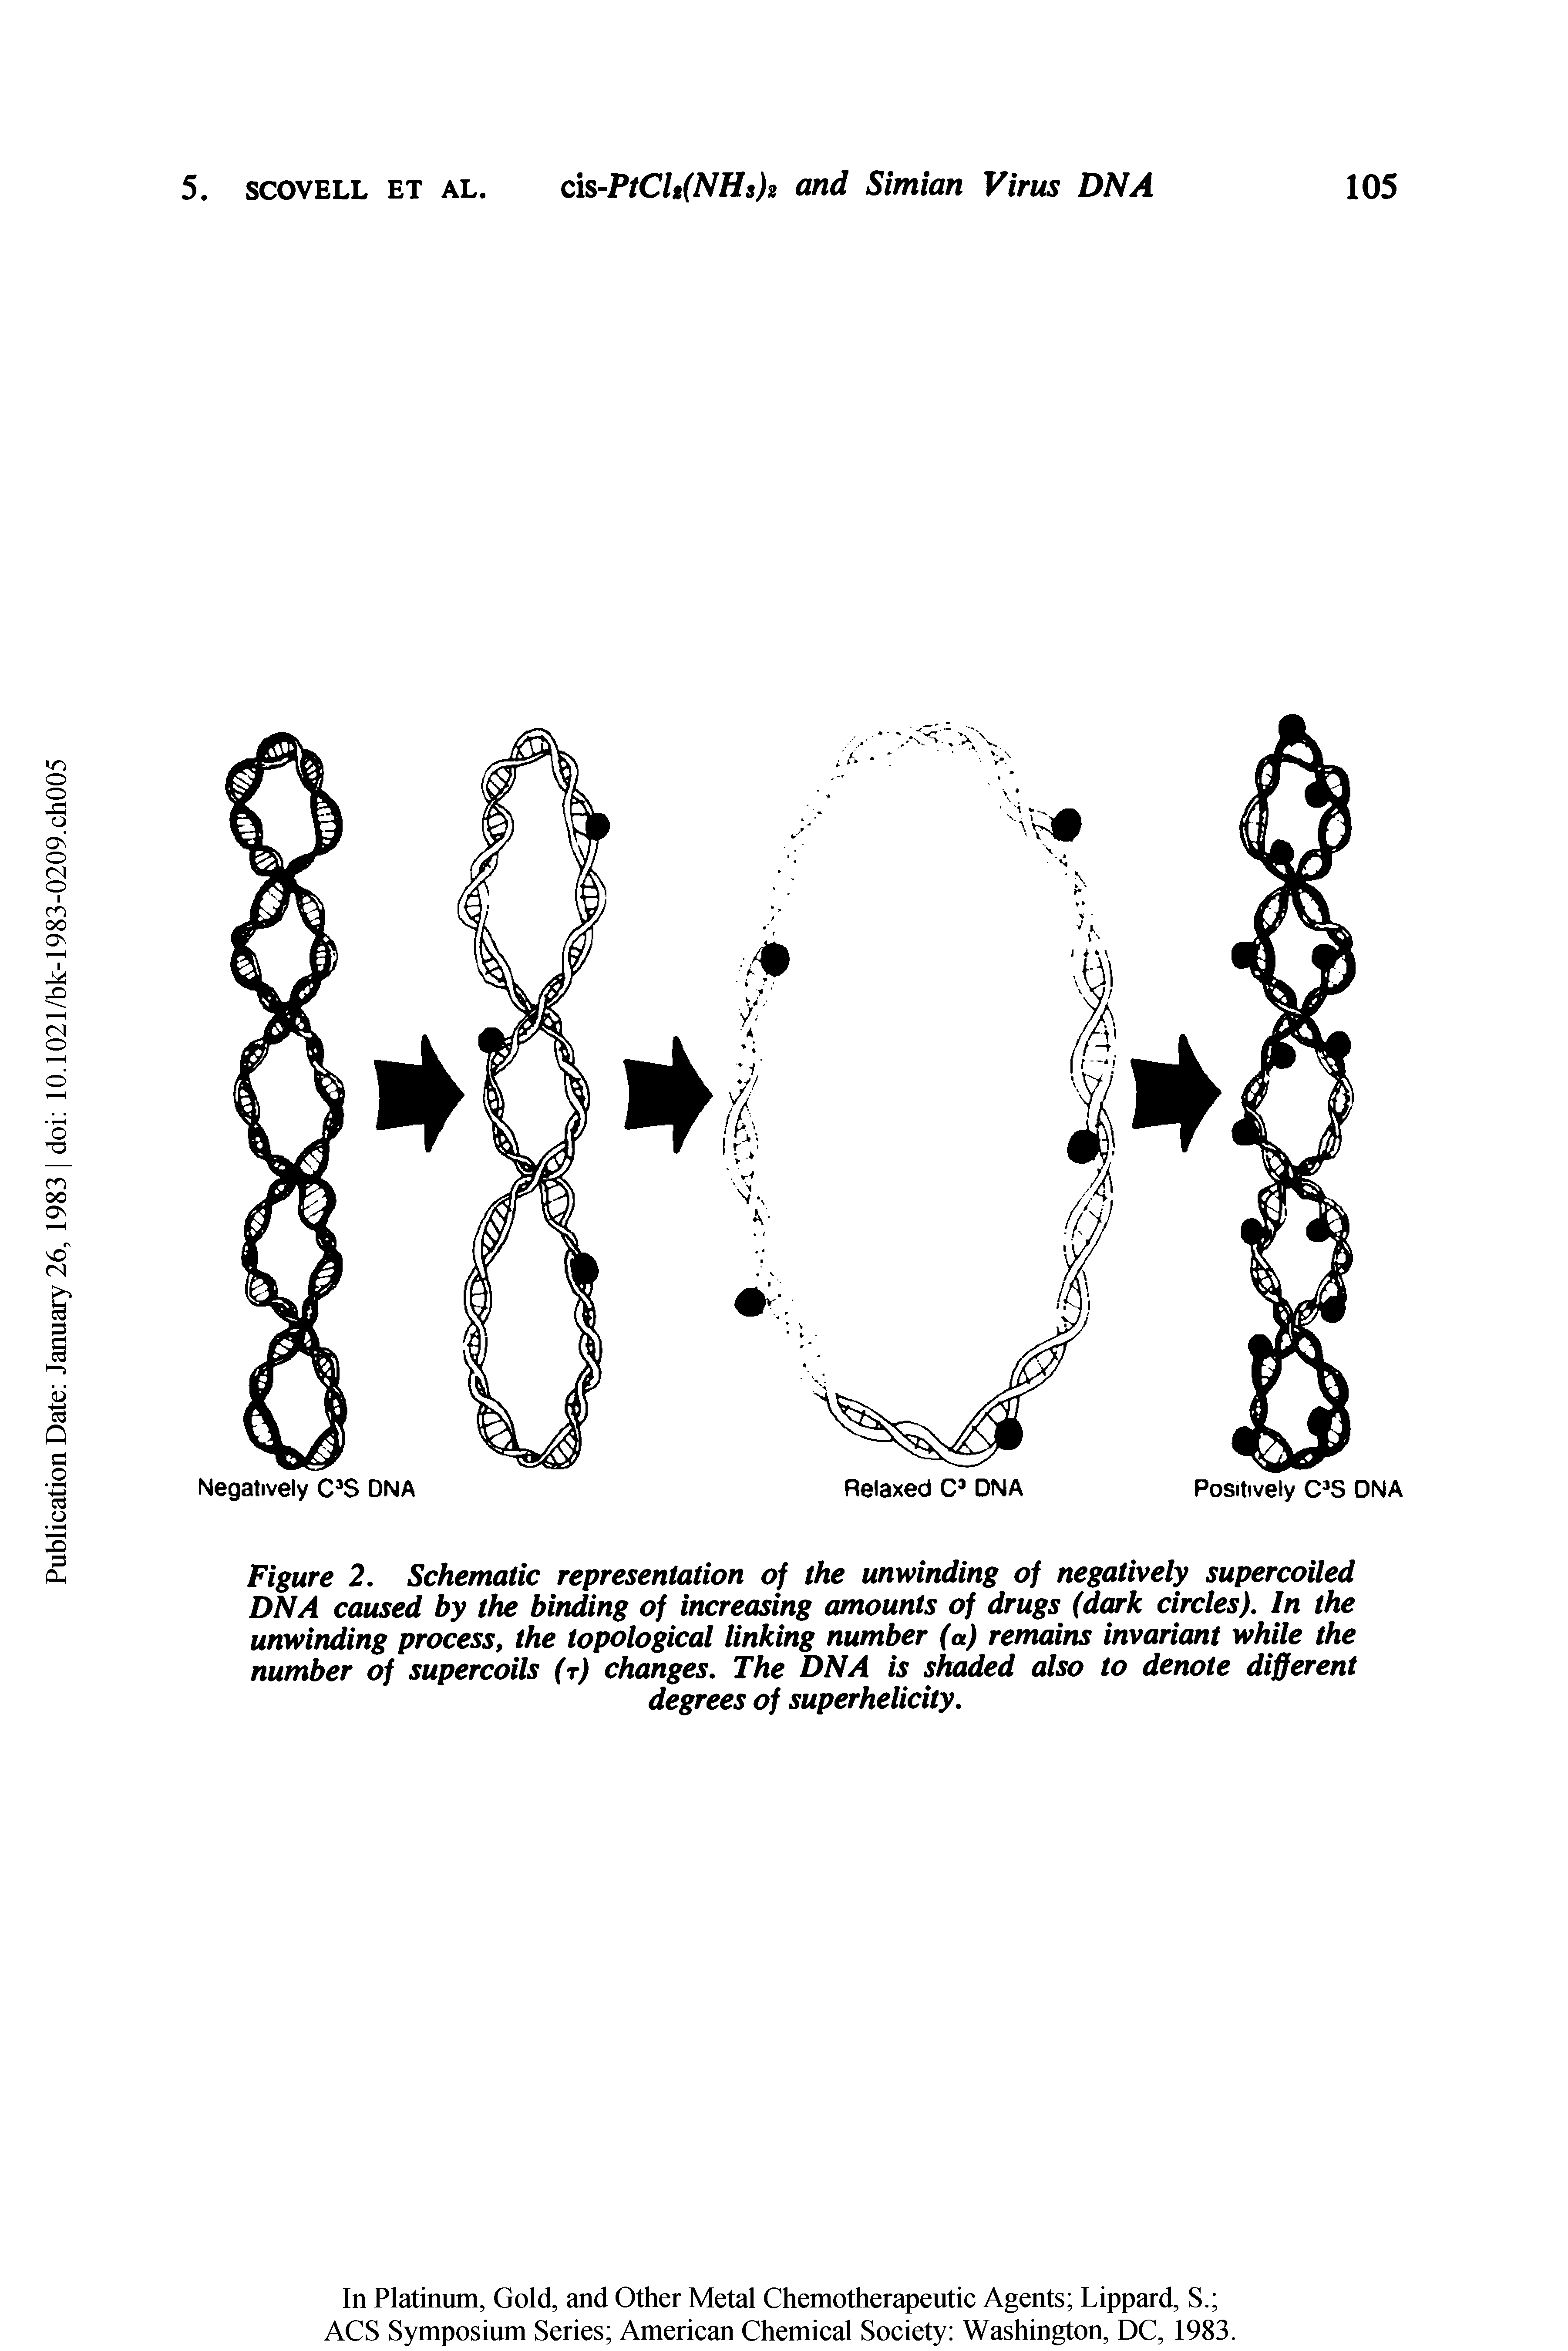 Figure 2. Schematic representation of the unwinding of negatively supercoiled DNA caused by the binding of increasing amounts of drugs (dark circles). In the unwinding process, the topological linking number (a) remains invariant while the number of supercoils (t) changes. The DNA is shaded also to denote different...